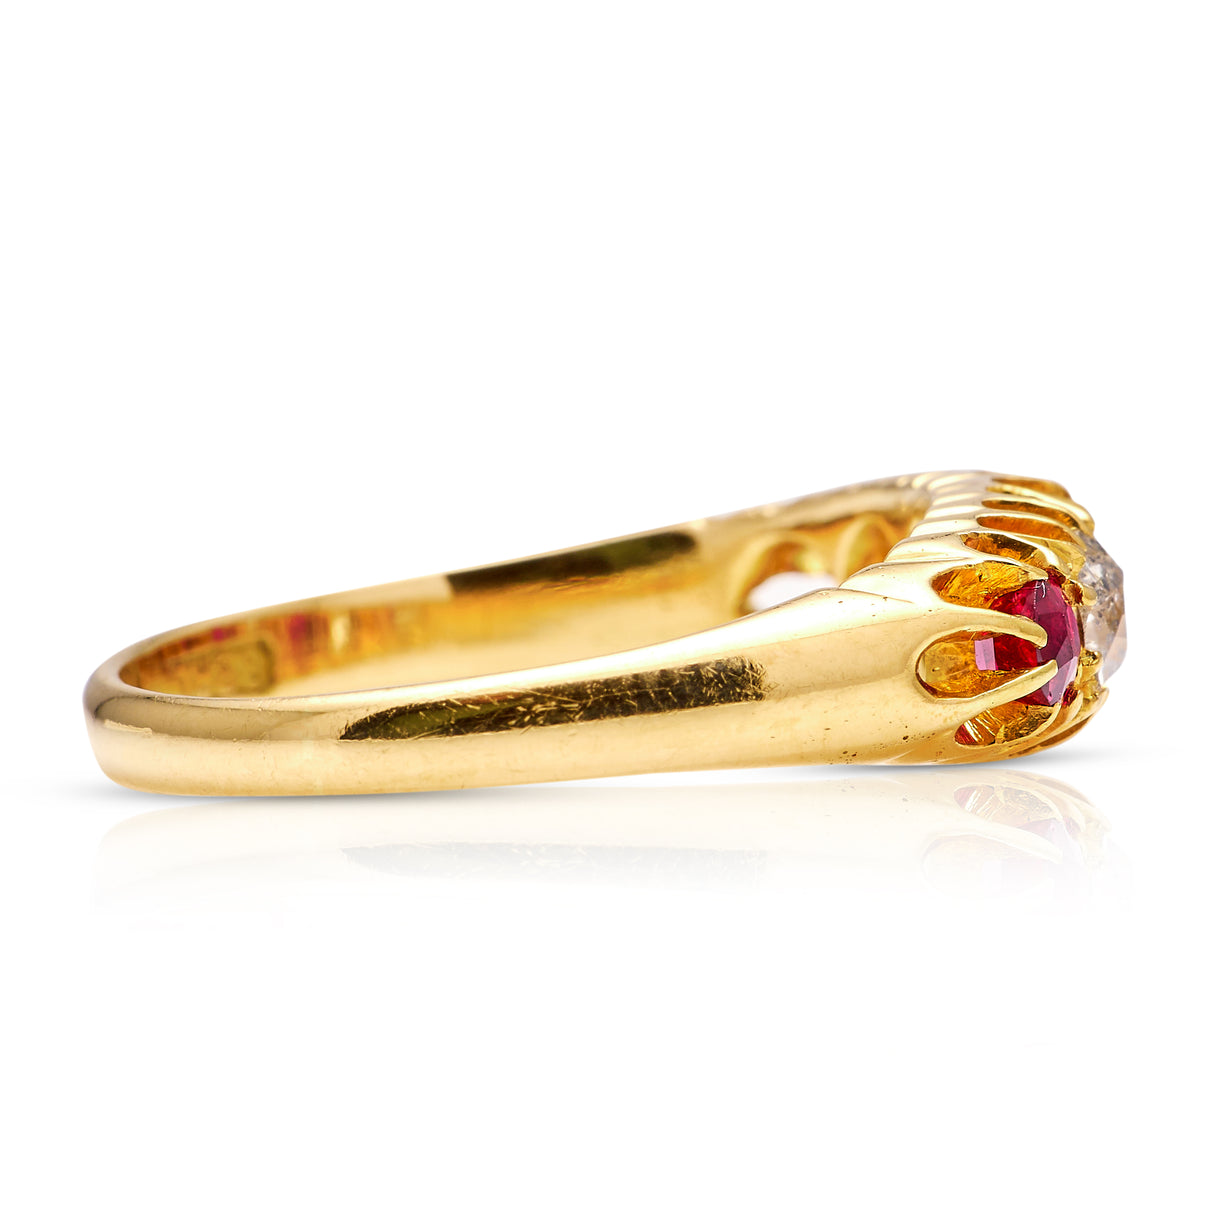 Antique, Victorian five stone ruby and diamond ring, 18ct yellow gold